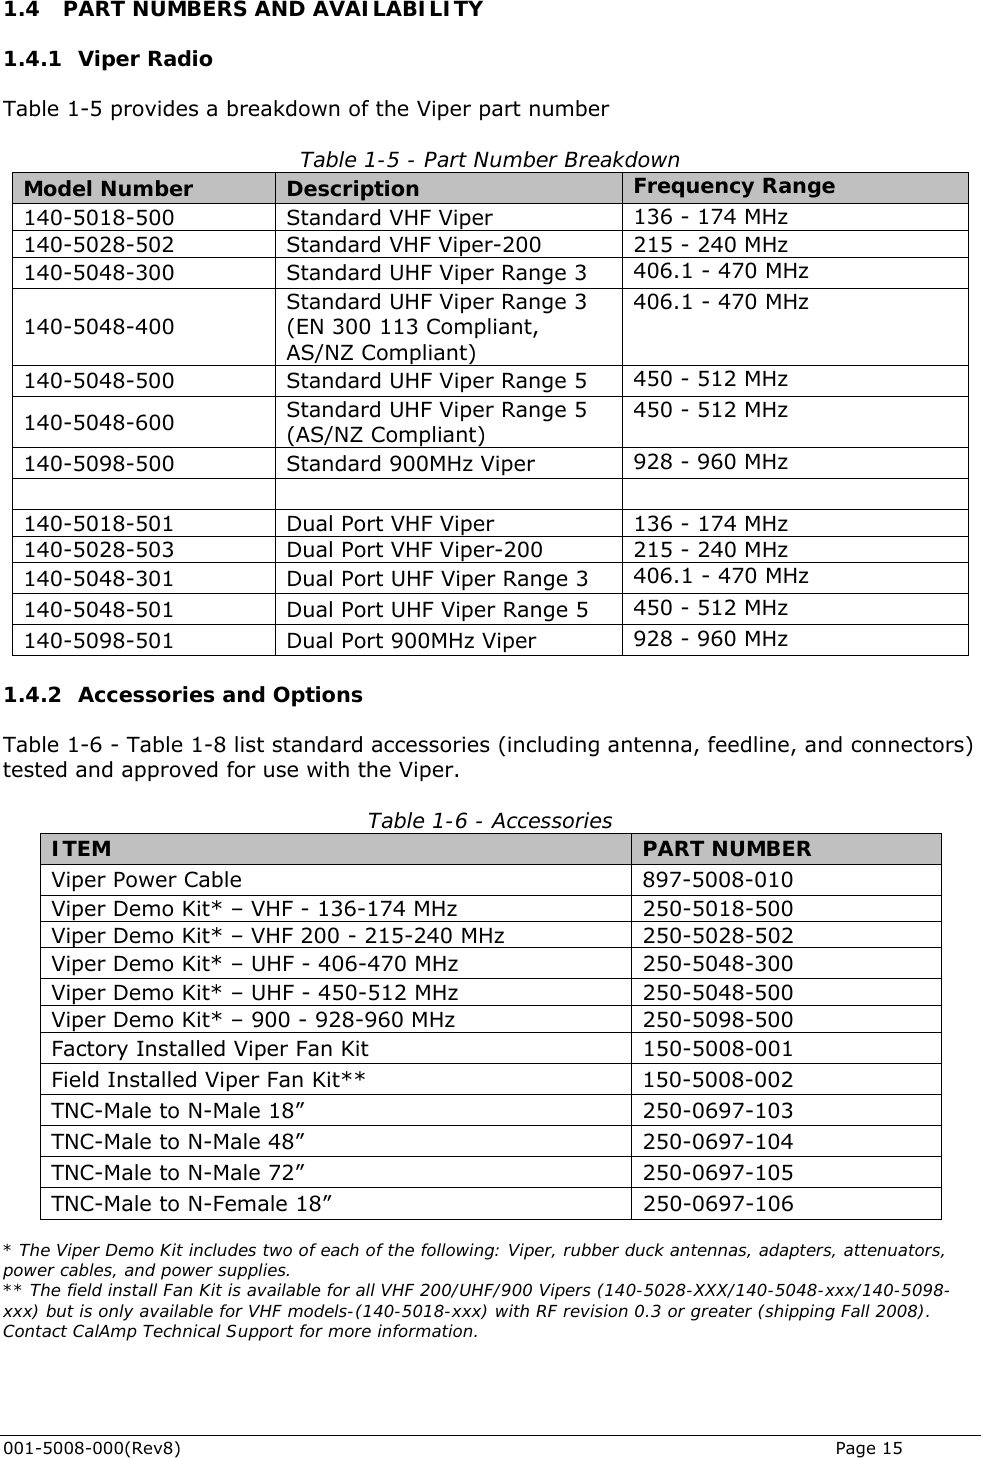  001-5008-000(Rev8)   Page 15 1.4 PART NUMBERS AND AVAILABILITY 1.4.1 Viper Radio Table 1-5 provides a breakdown of the Viper part number  Table 1-5 - Part Number Breakdown Model Number  Description  Frequency Range 140-5018-500  Standard VHF Viper  136 - 174 MHz 140-5028-502  Standard VHF Viper-200  215 - 240 MHz 140-5048-300  Standard UHF Viper Range 3  406.1 - 470 MHz 140-5048-400 Standard UHF Viper Range 3 (EN 300 113 Compliant, AS/NZ Compliant) 406.1 - 470 MHz 140-5048-500  Standard UHF Viper Range 5  450 - 512 MHz 140-5048-600  Standard UHF Viper Range 5 (AS/NZ Compliant) 450 - 512 MHz 140-5098-500  Standard 900MHz Viper  928 - 960 MHz     140-5018-501  Dual Port VHF Viper  136 - 174 MHz 140-5028-503  Dual Port VHF Viper-200  215 - 240 MHz 140-5048-301  Dual Port UHF Viper Range 3  406.1 - 470 MHz 140-5048-501  Dual Port UHF Viper Range 5  450 - 512 MHz 140-5098-501  Dual Port 900MHz Viper  928 - 960 MHz 1.4.2 Accessories and Options Table 1-6 - Table 1-8 list standard accessories (including antenna, feedline, and connectors) tested and approved for use with the Viper. Table 1-6 - Accessories ITEM  PART NUMBER Viper Power Cable  897-5008-010  Viper Demo Kit* – VHF - 136-174 MHz  250-5018-500 Viper Demo Kit* – VHF 200 - 215-240 MHz  250-5028-502 Viper Demo Kit* – UHF - 406-470 MHz  250-5048-300 Viper Demo Kit* – UHF - 450-512 MHz  250-5048-500 Viper Demo Kit* – 900 - 928-960 MHz  250-5098-500 Factory Installed Viper Fan Kit  150-5008-001 Field Installed Viper Fan Kit**  150-5008-002 TNC-Male to N-Male 18”  250-0697-103 TNC-Male to N-Male 48”  250-0697-104 TNC-Male to N-Male 72”  250-0697-105 TNC-Male to N-Female 18”  250-0697-106  * The Viper Demo Kit includes two of each of the following: Viper, rubber duck antennas, adapters, attenuators, power cables, and power supplies. ** The field install Fan Kit is available for all VHF 200/UHF/900 Vipers (140-5028-XXX/140-5048-xxx/140-5098-xxx) but is only available for VHF models-(140-5018-xxx) with RF revision 0.3 or greater (shipping Fall 2008). Contact CalAmp Technical Support for more information.  